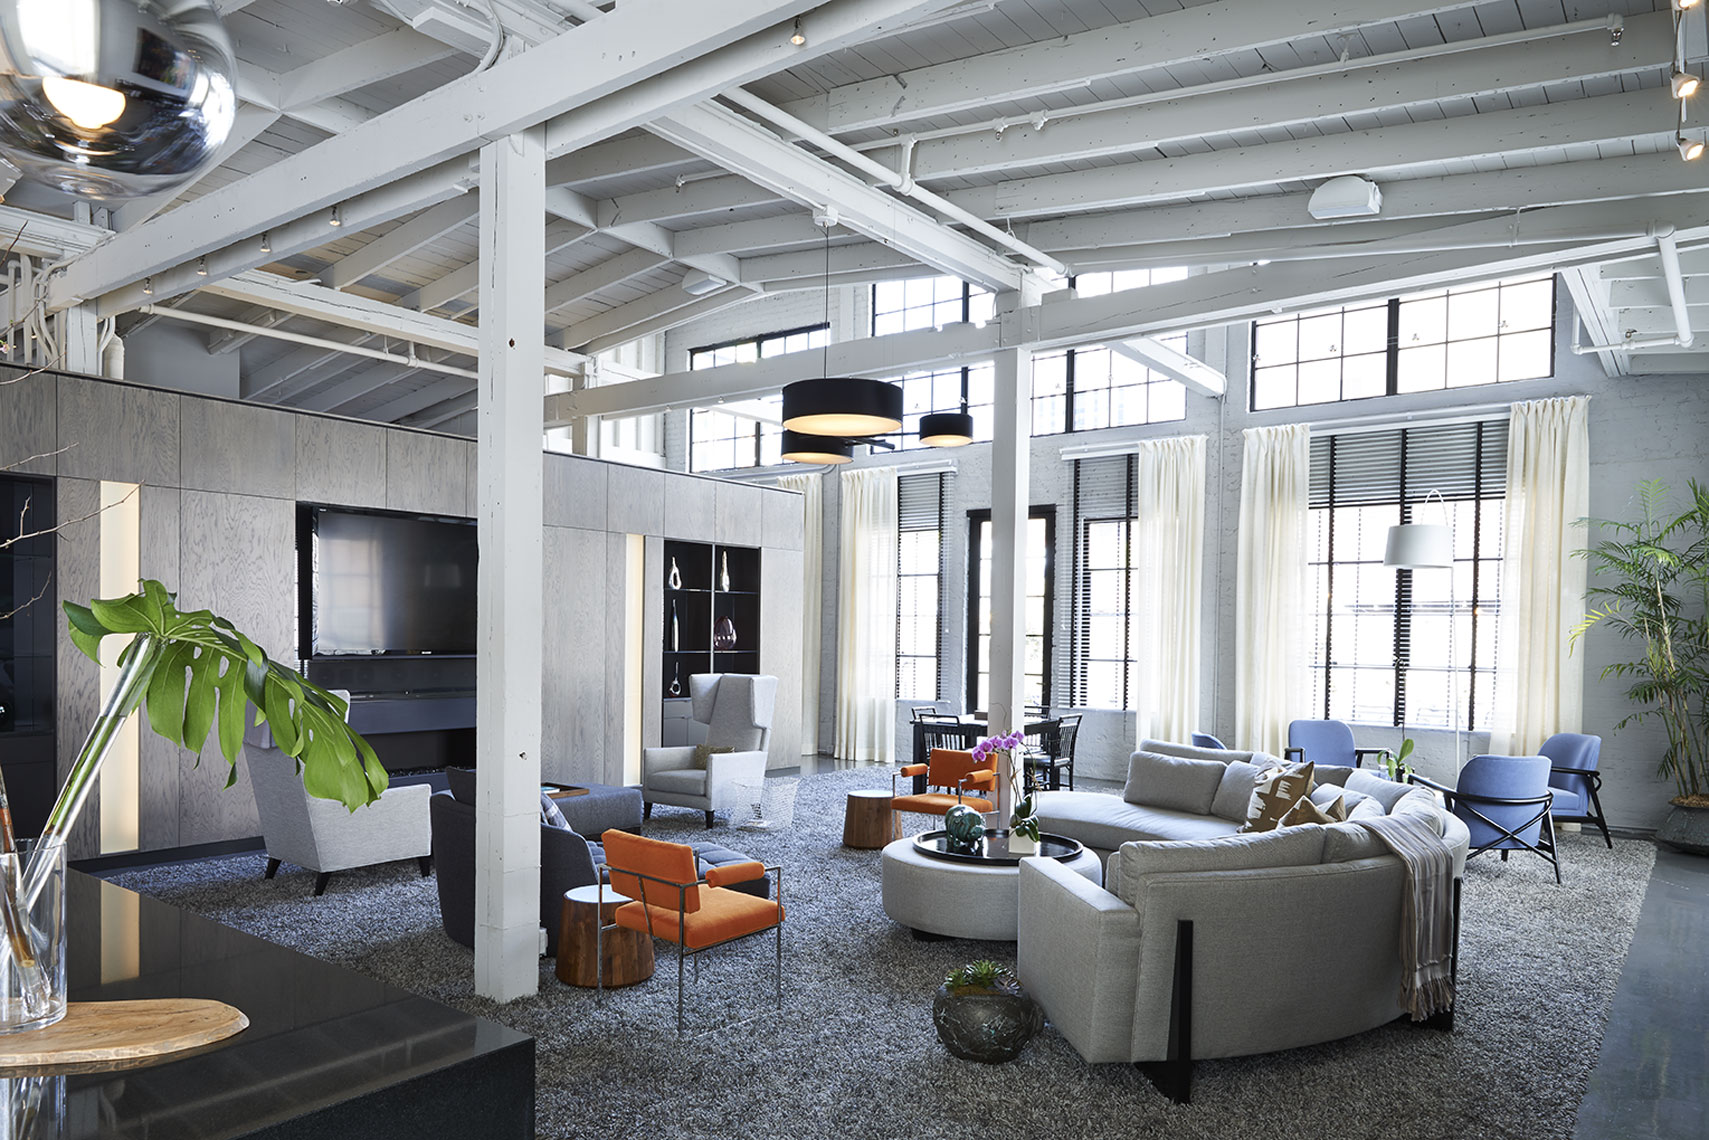 Grand room in New Orleans loft apartment by Alison Gootee